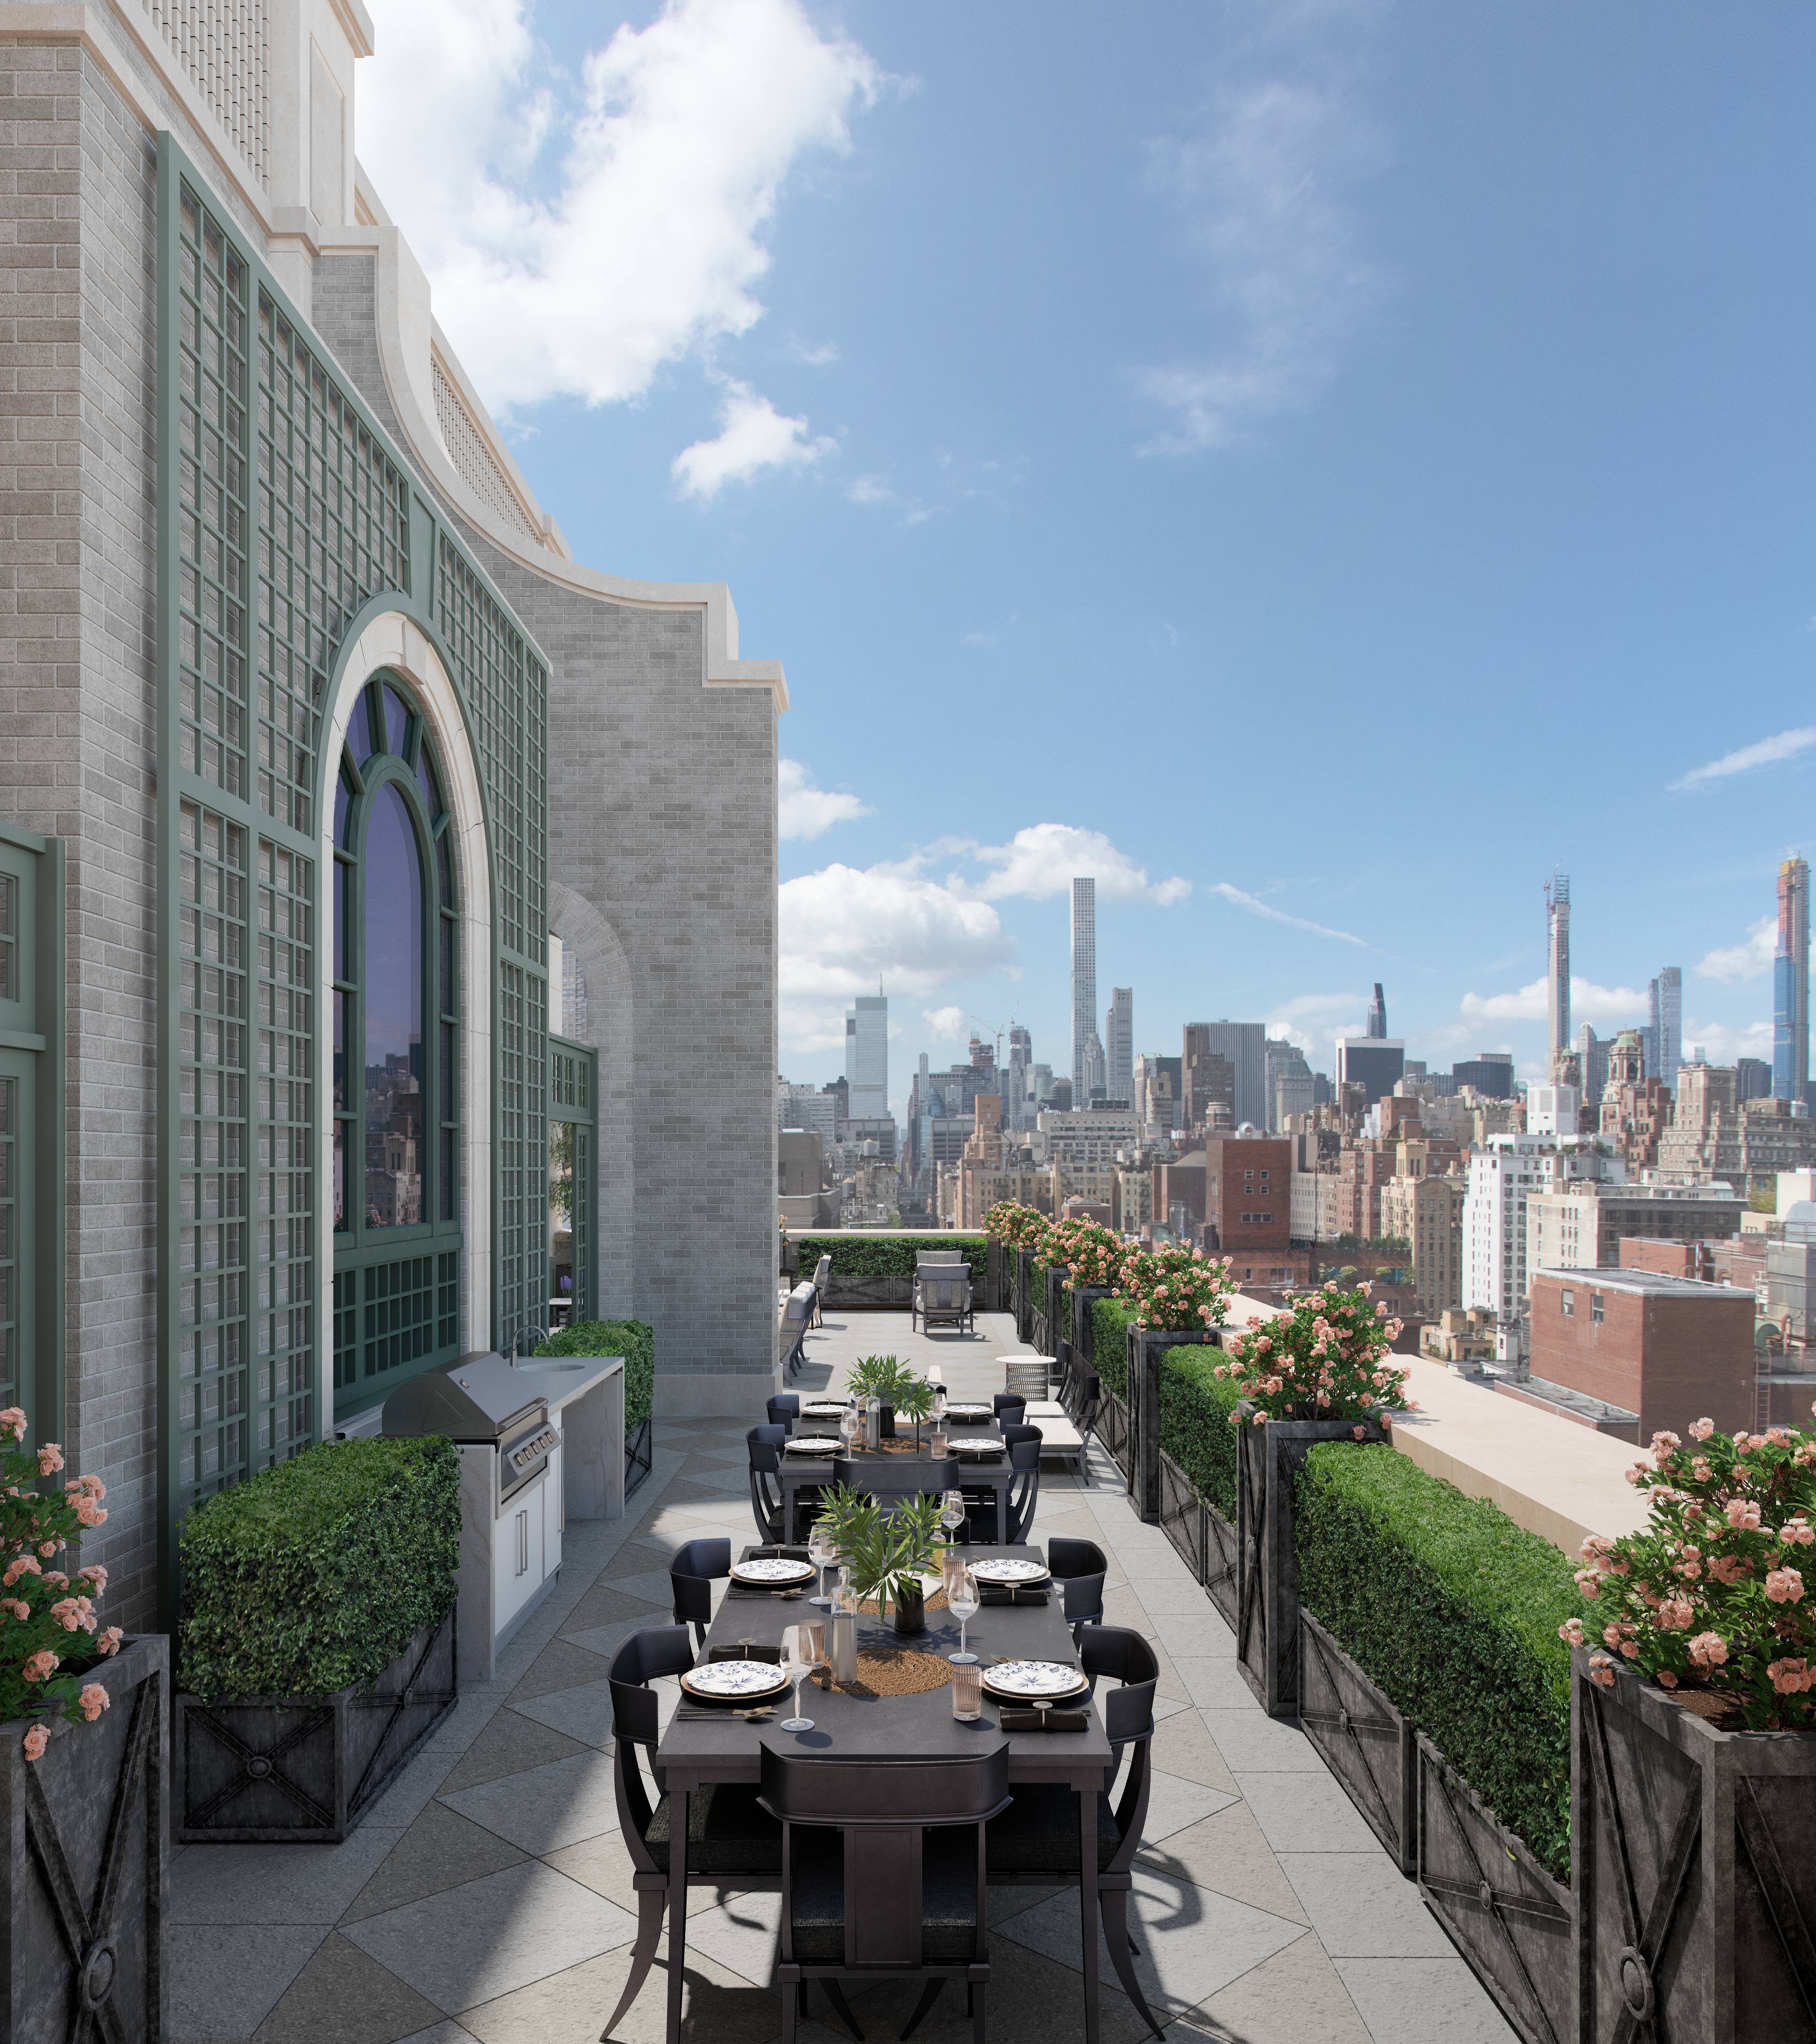 3B is a gracious three bedroom, three and a half bath 2, 183 SF residence that provides a flexible floor plan and signature Juliet balconies at each full height window ...